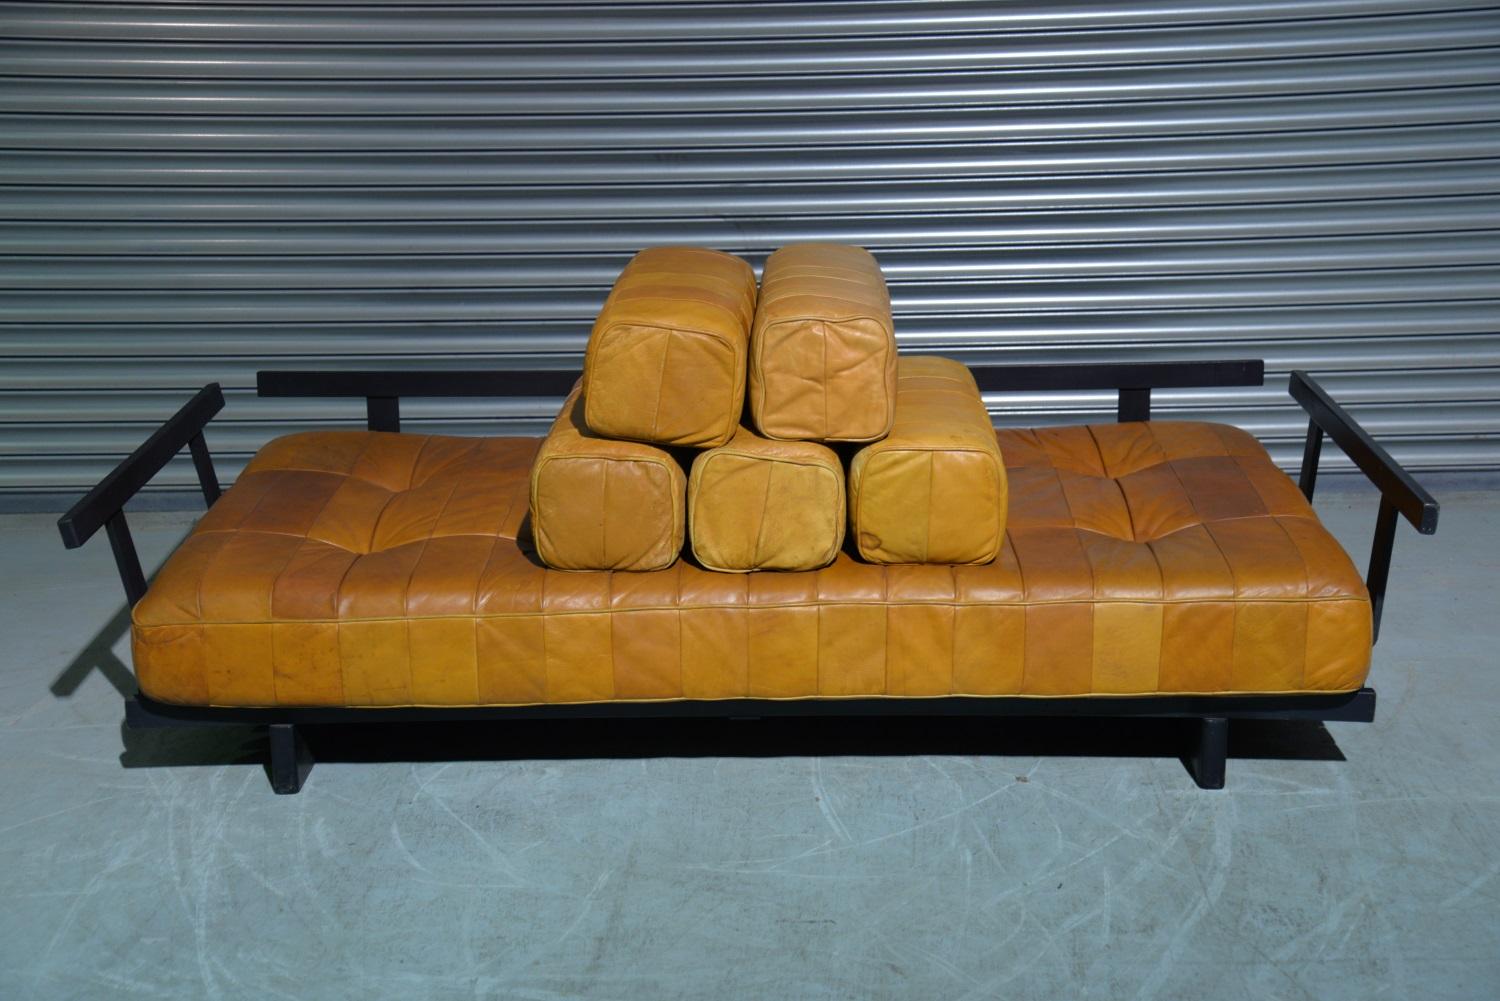 Vintage De Sede Ds 80 Patchwork Leather Daybed, Switzerland 1960s For Sale 7